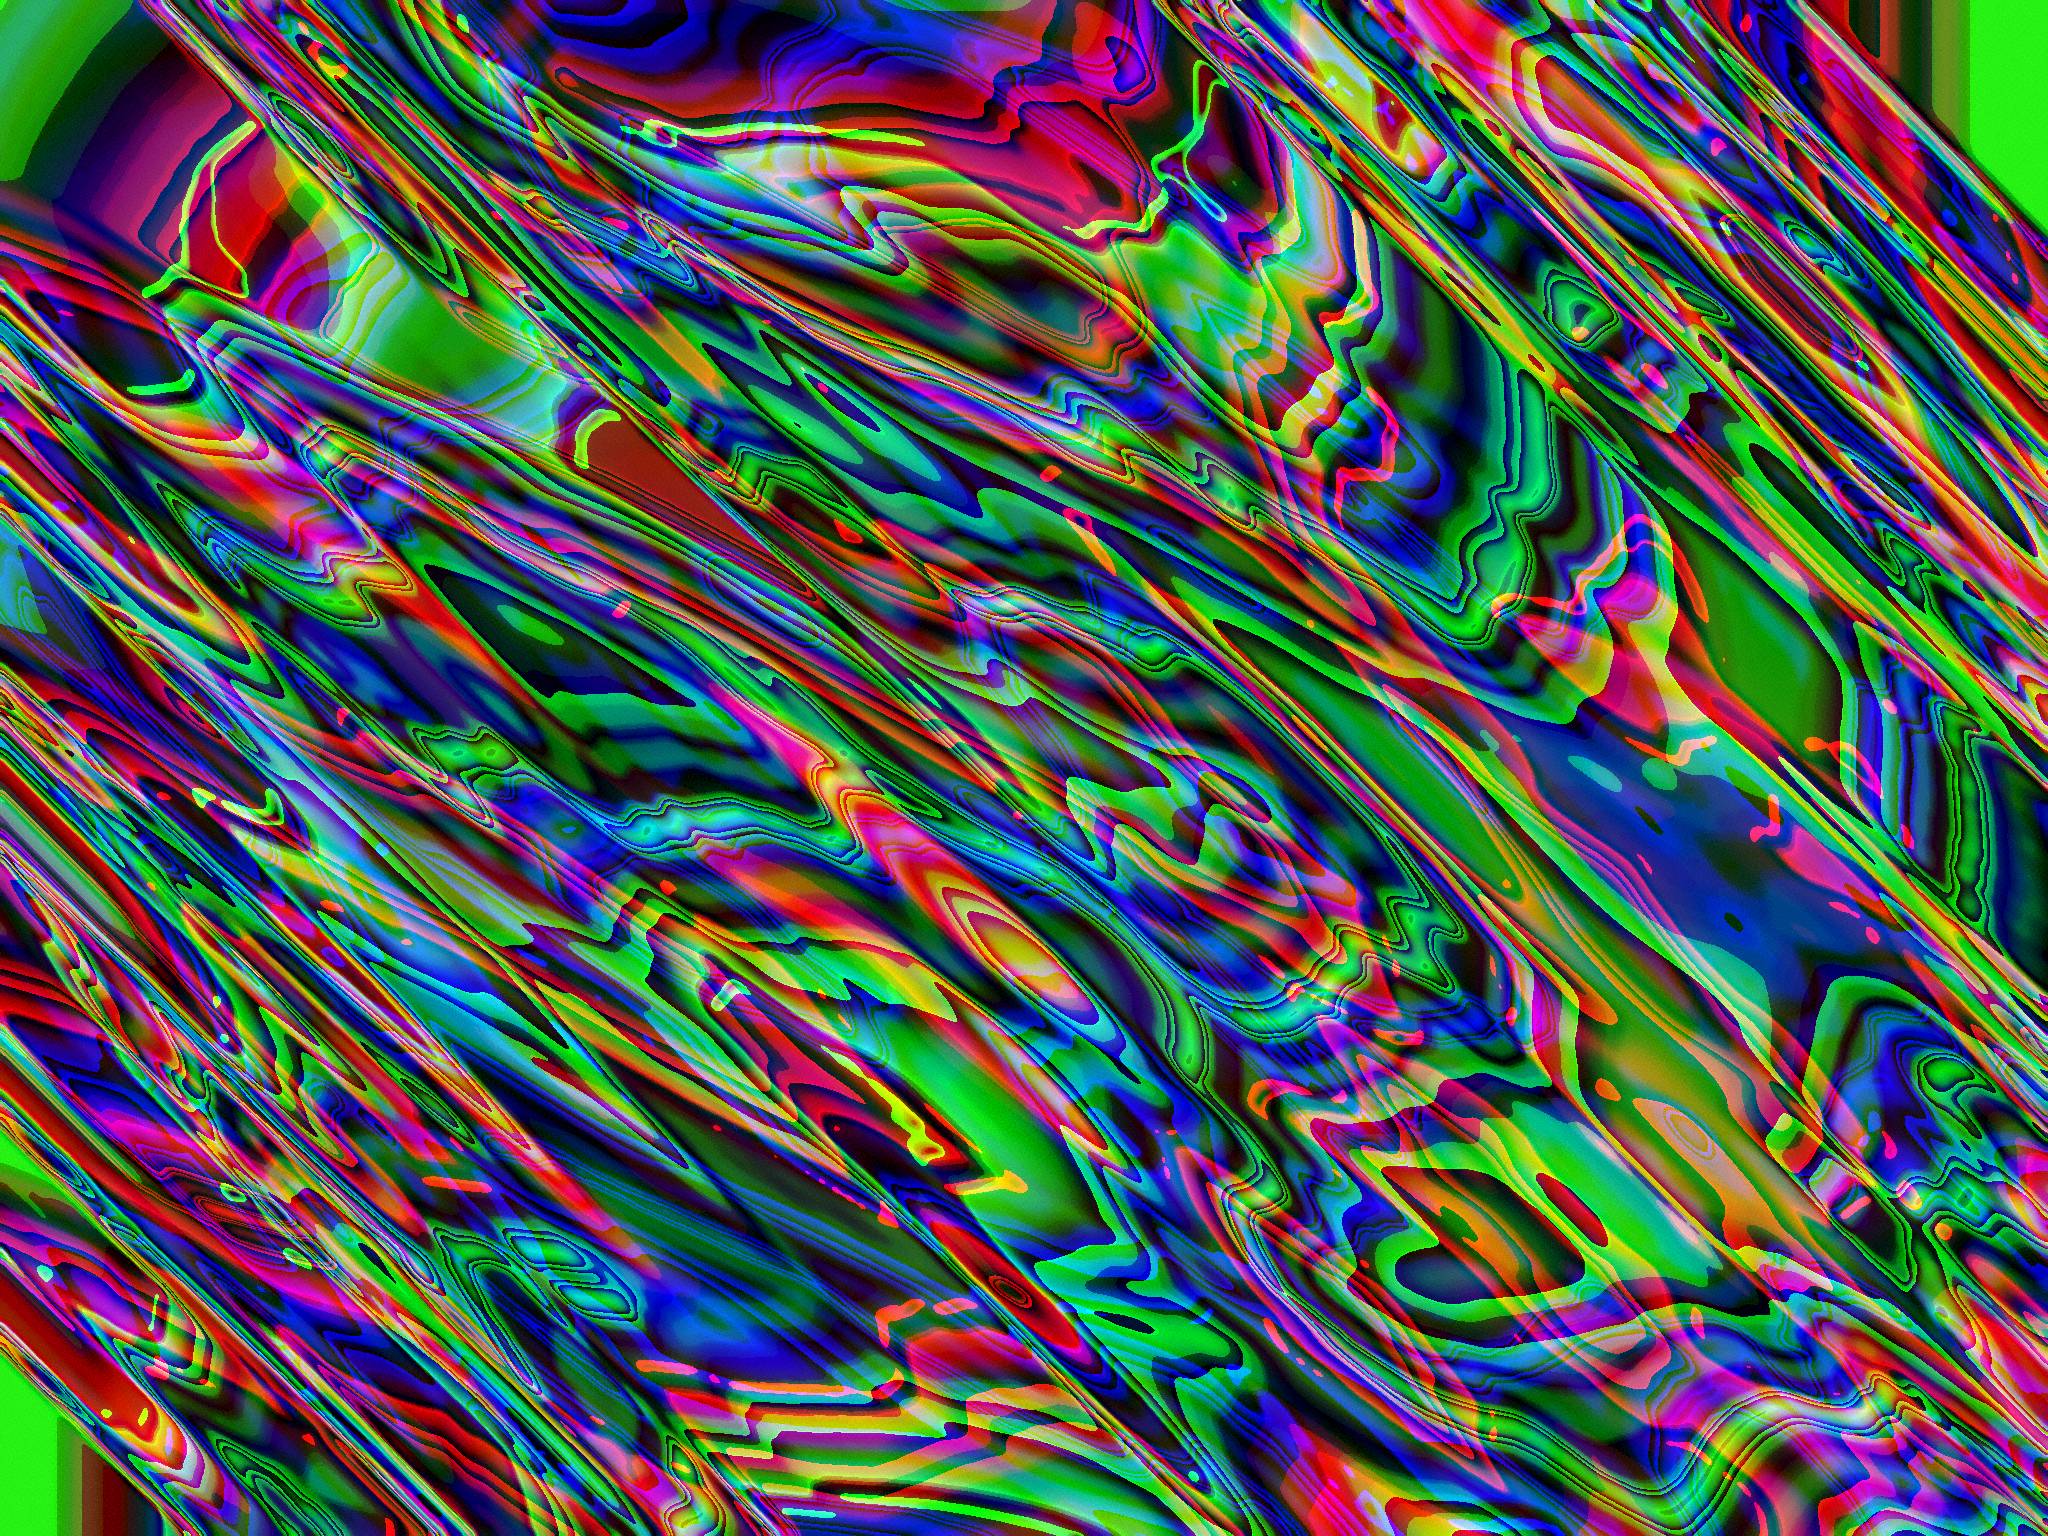 Moving Trippy Wallpapers, wallpaper, Moving Trippy Wallpapers hd